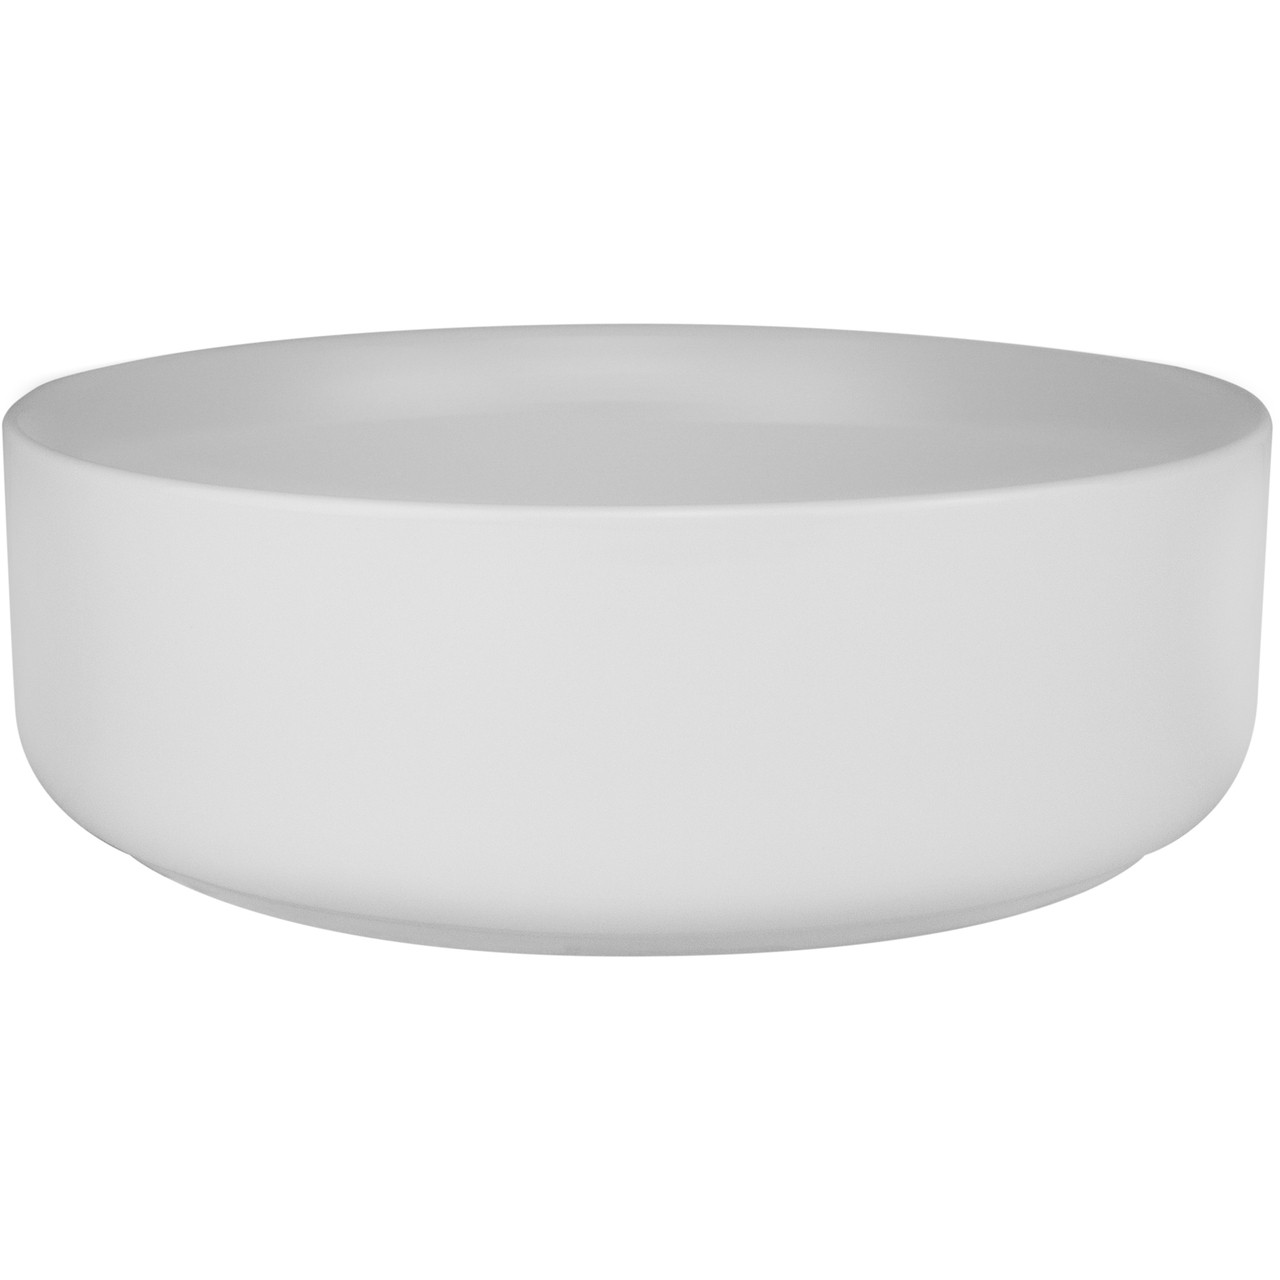 Round Vessel High Quality Contemporary Vanity Sinks